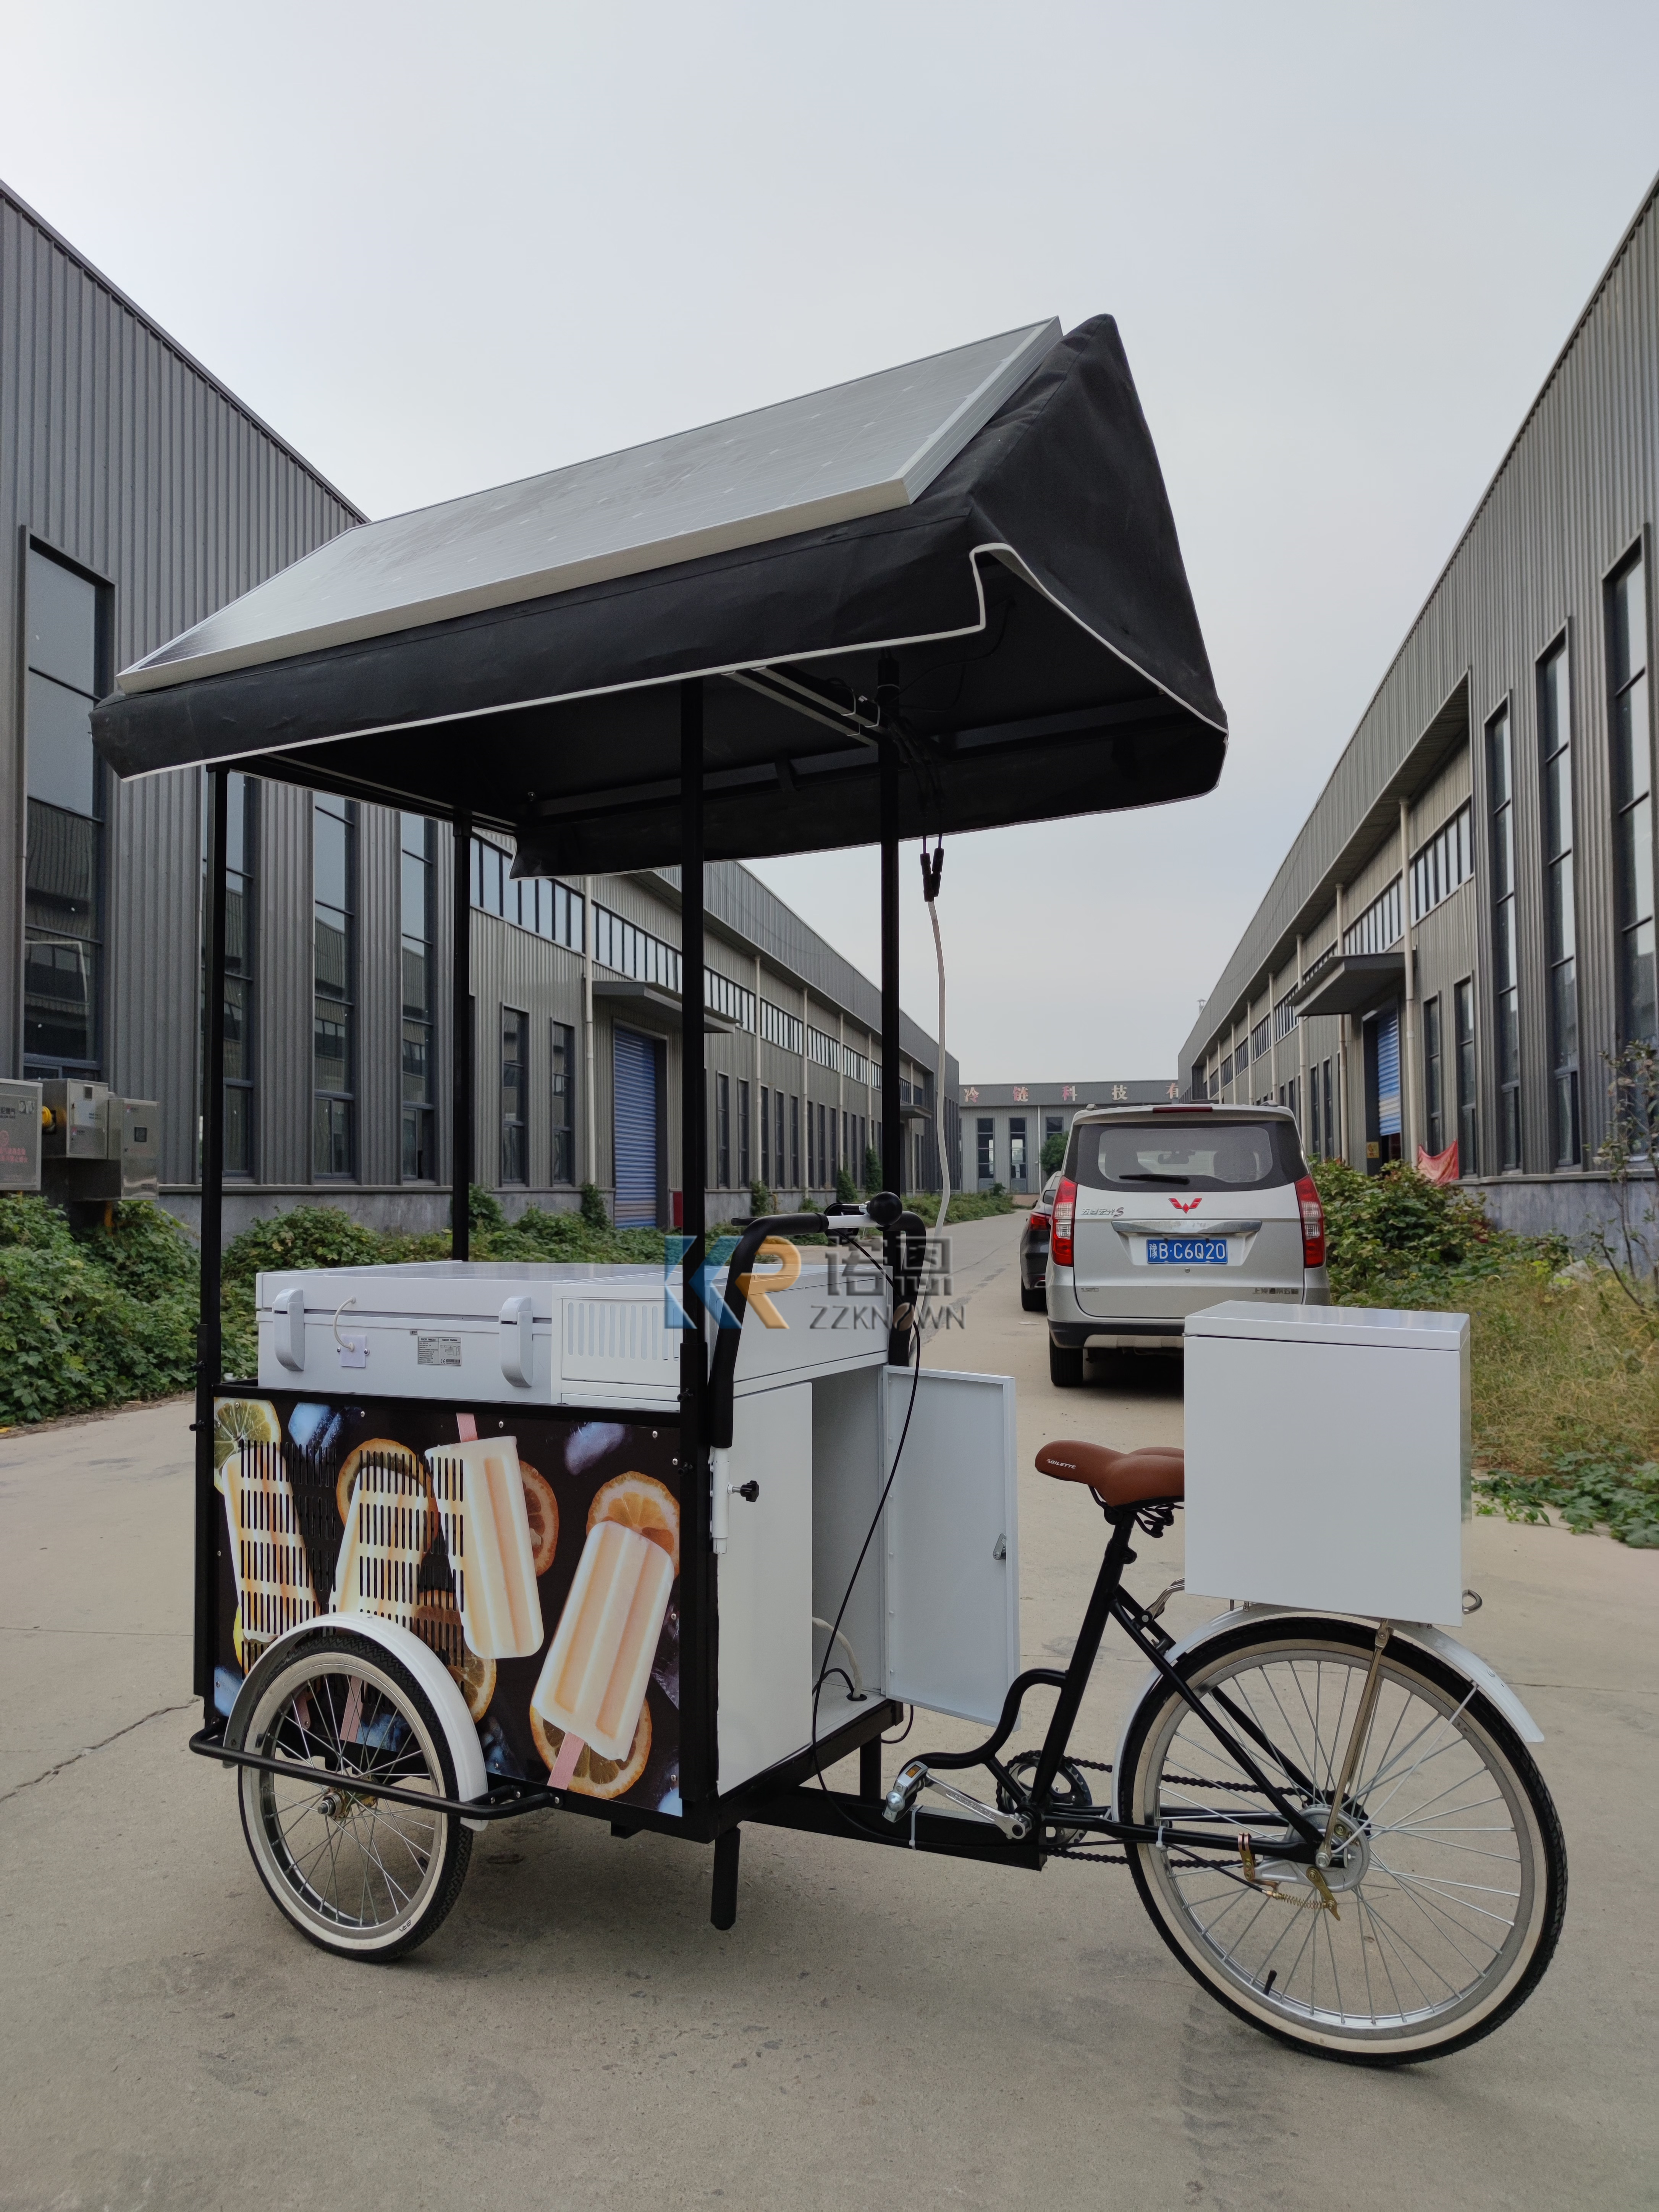 New Design Ice Cream Push Cart With Display Freezer Mobile Juices And Ice Cream Kiosk Trailer Fast Food Cart Store Truck